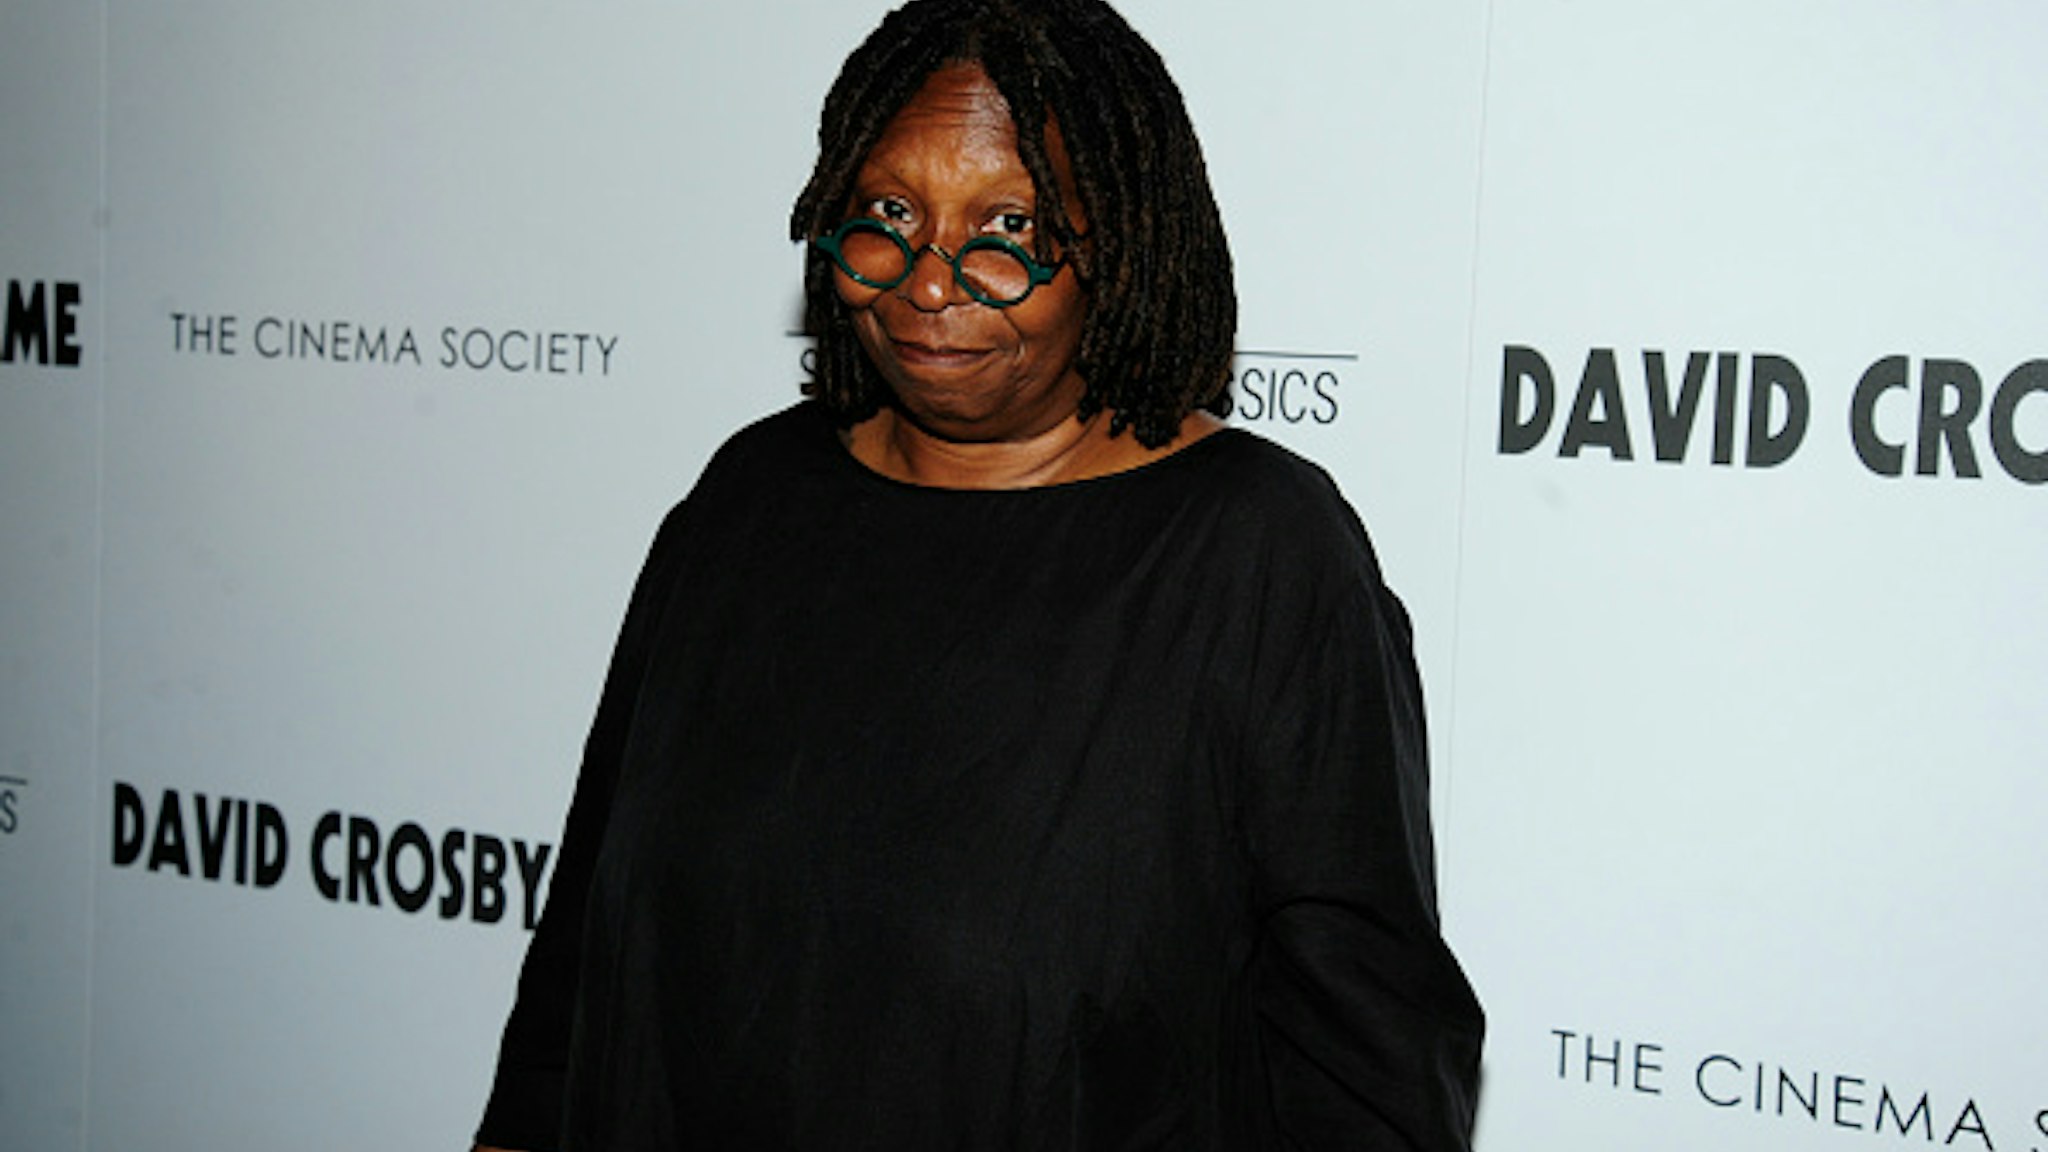 Whoopi Goldberg attends Sony Pictures Classics & The Cinema Society Host A Screening Of "David Crosby: Remember My Name" at The Roxy Cinema on July 16, 2019 in New York City.